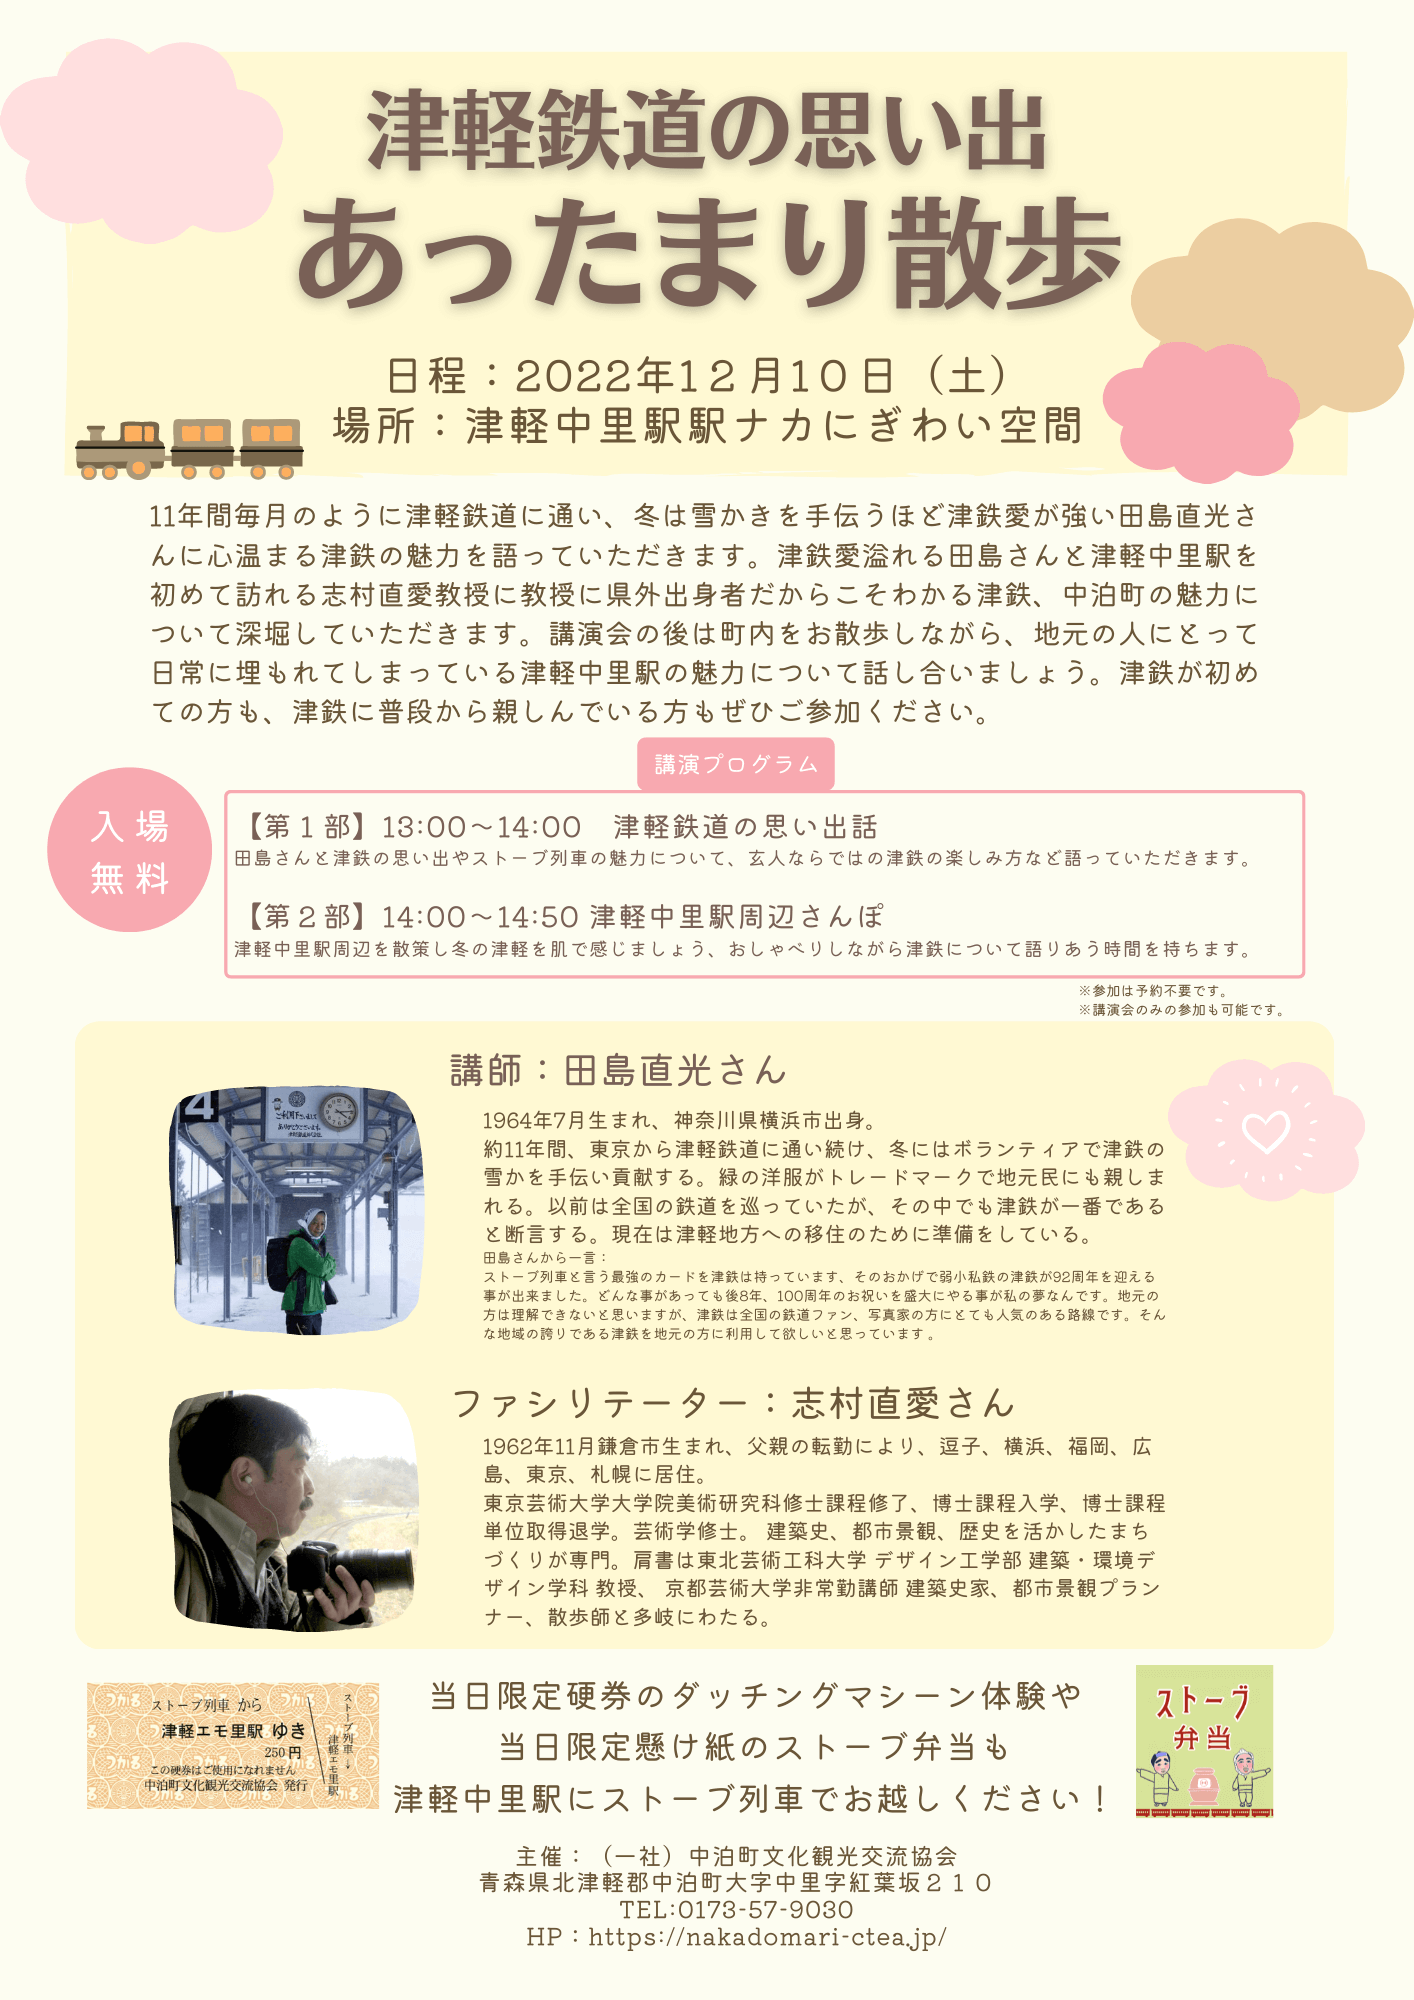 Featured image for “エモフェス　ステージイベント「津軽鉄道の思い出あったまり散歩」”